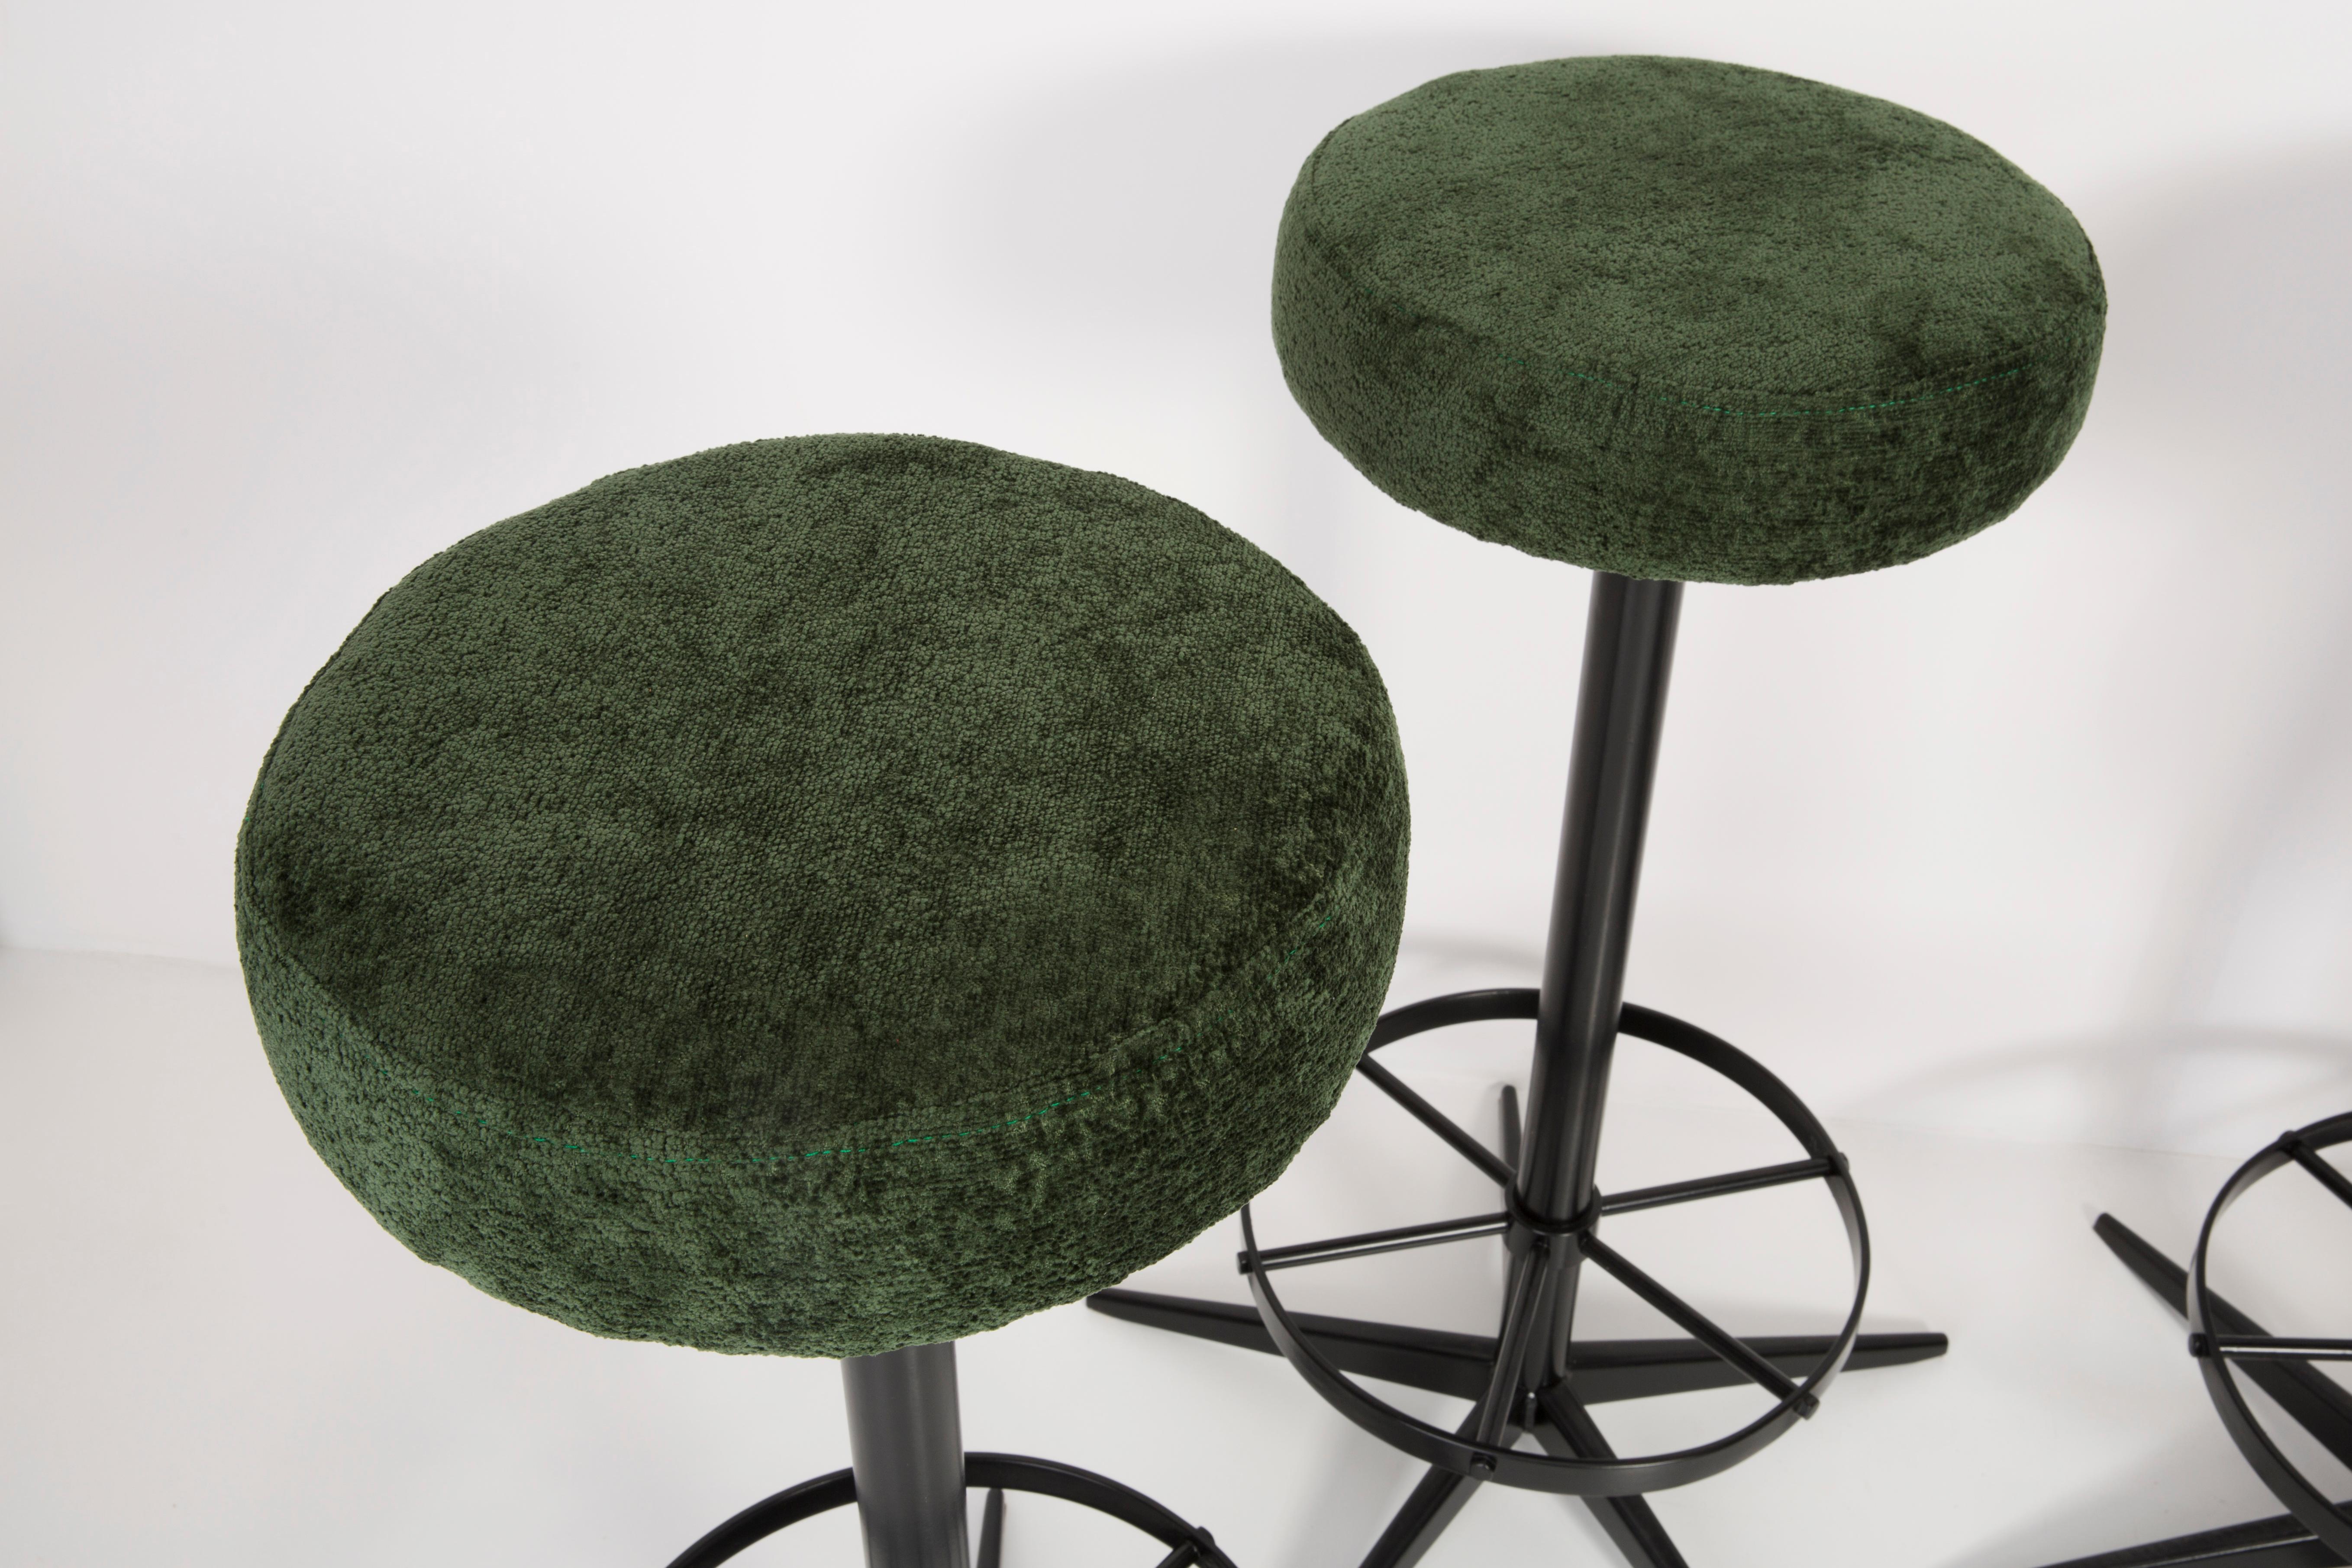 Stool from the turn of the 1960s. Produced in Germany. Beautiful, well crafted dark green Italian upholstery. The stool consists of an upholstered part, a seat and steel black legs. Not regulated. The height is constant.